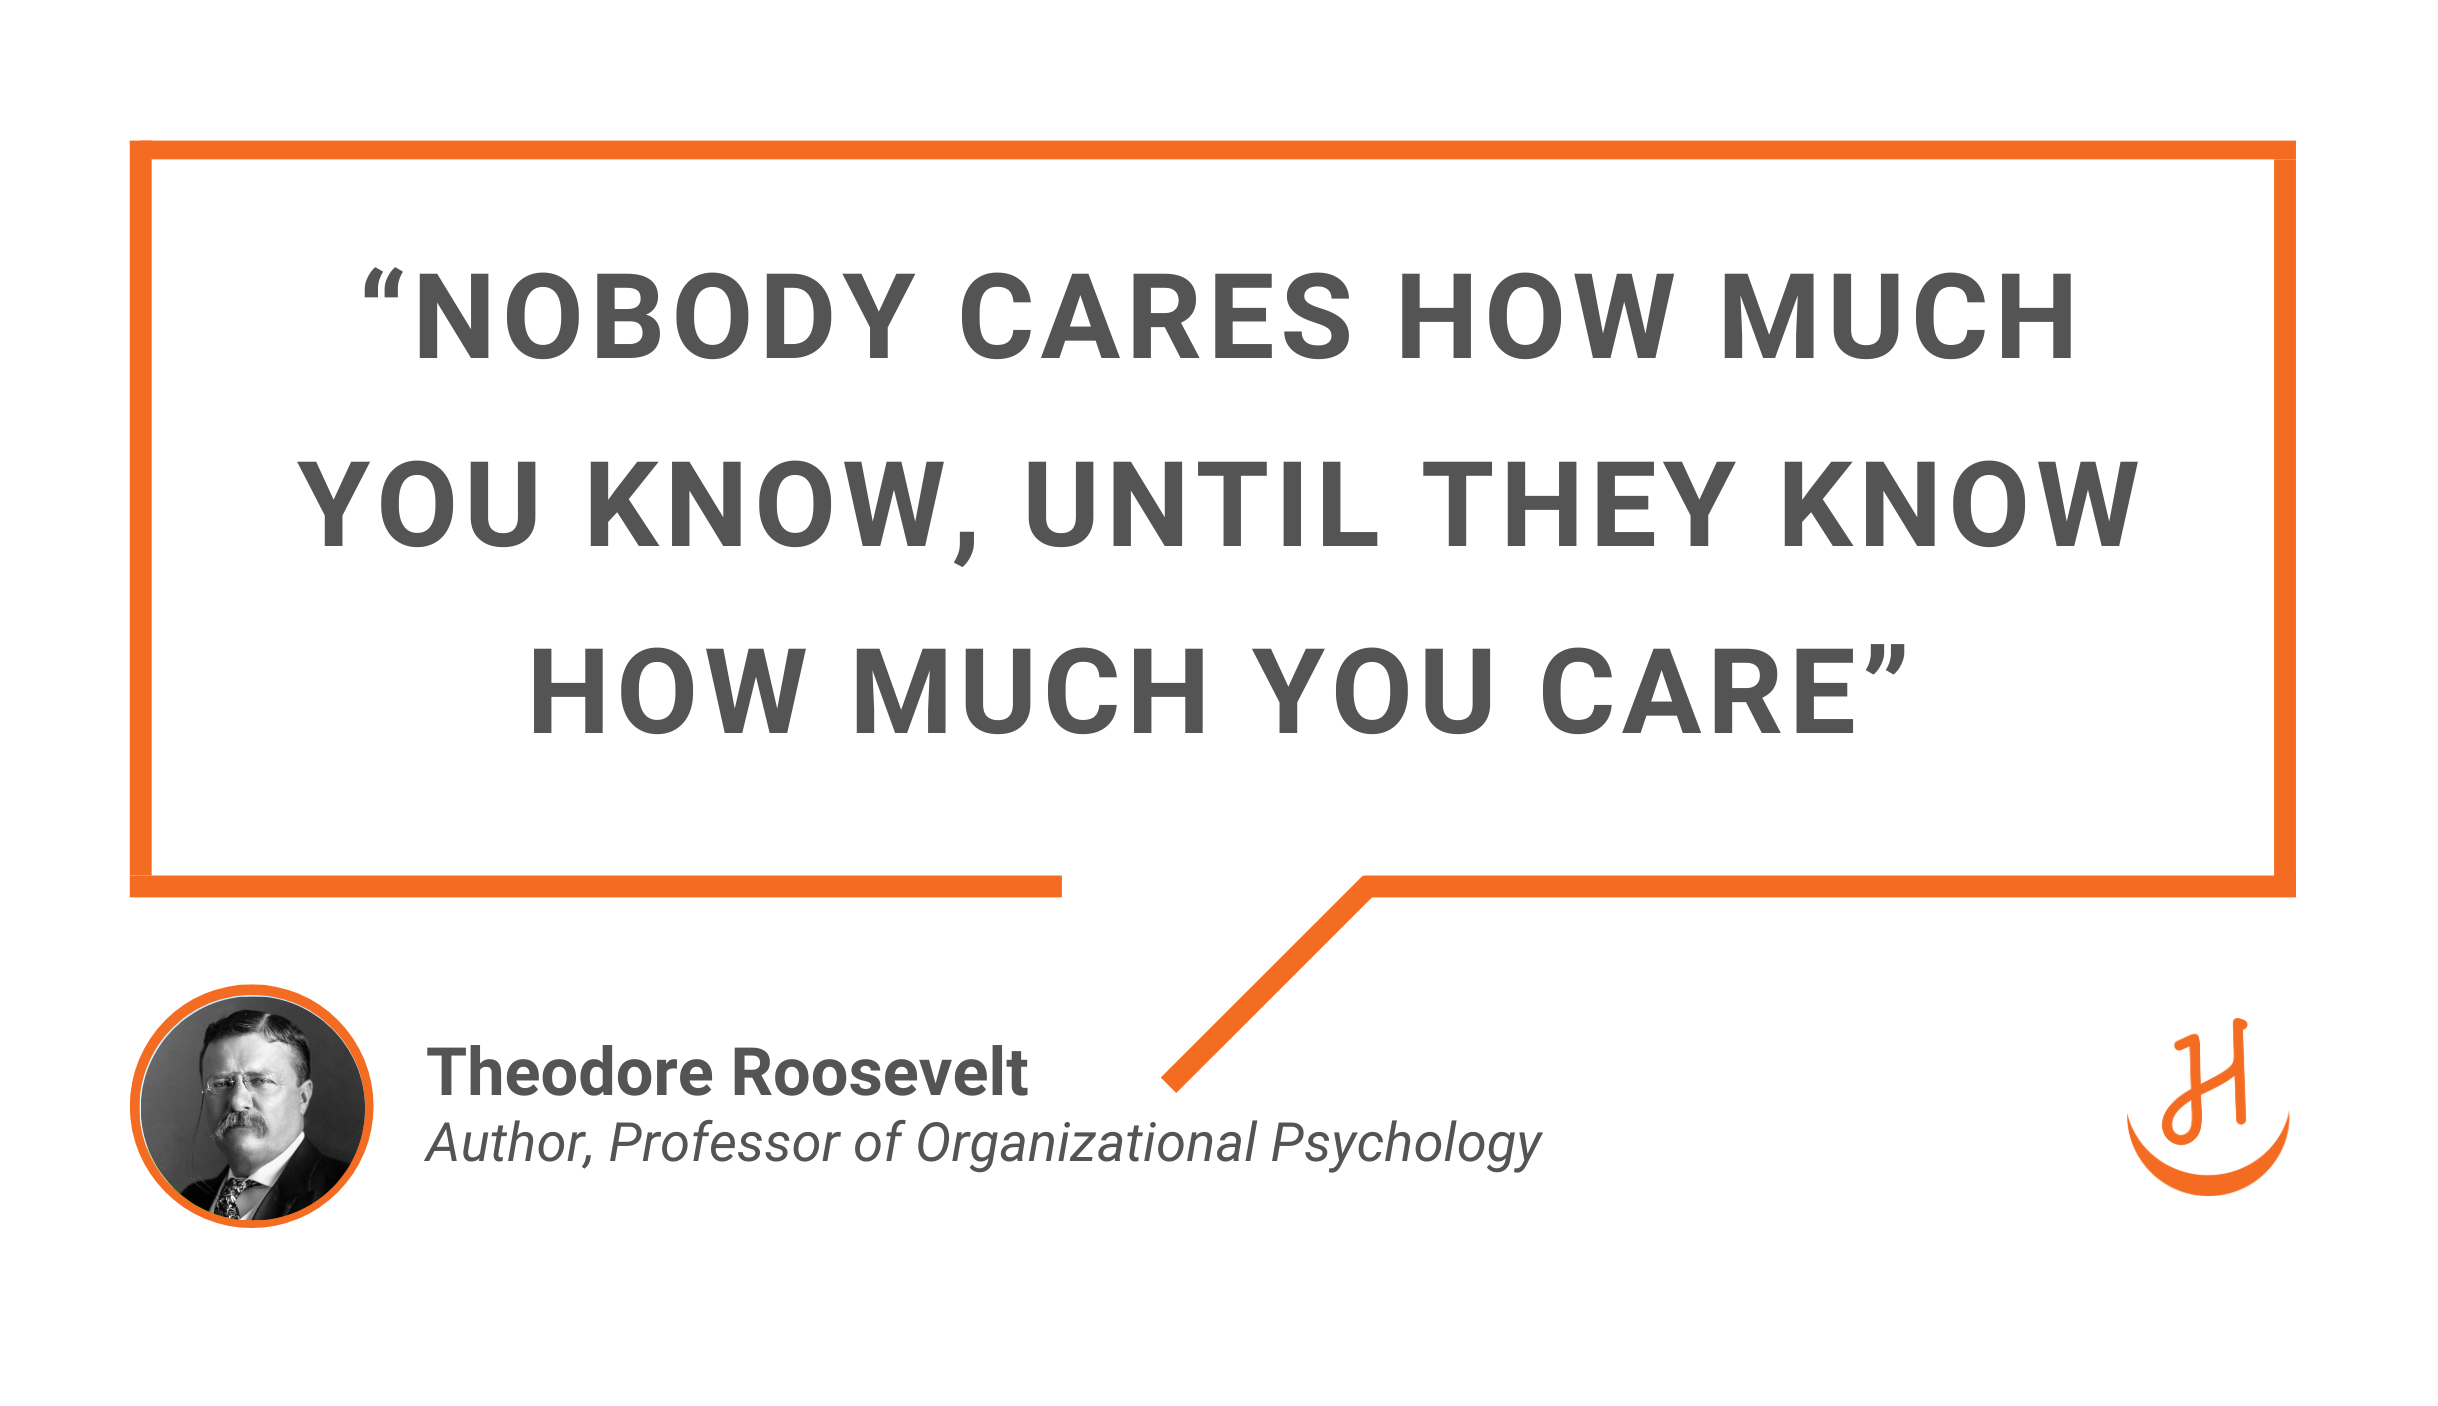 Quote by Theodore Roosevelt, "Nobody cares how much you know, until they know how much you care"